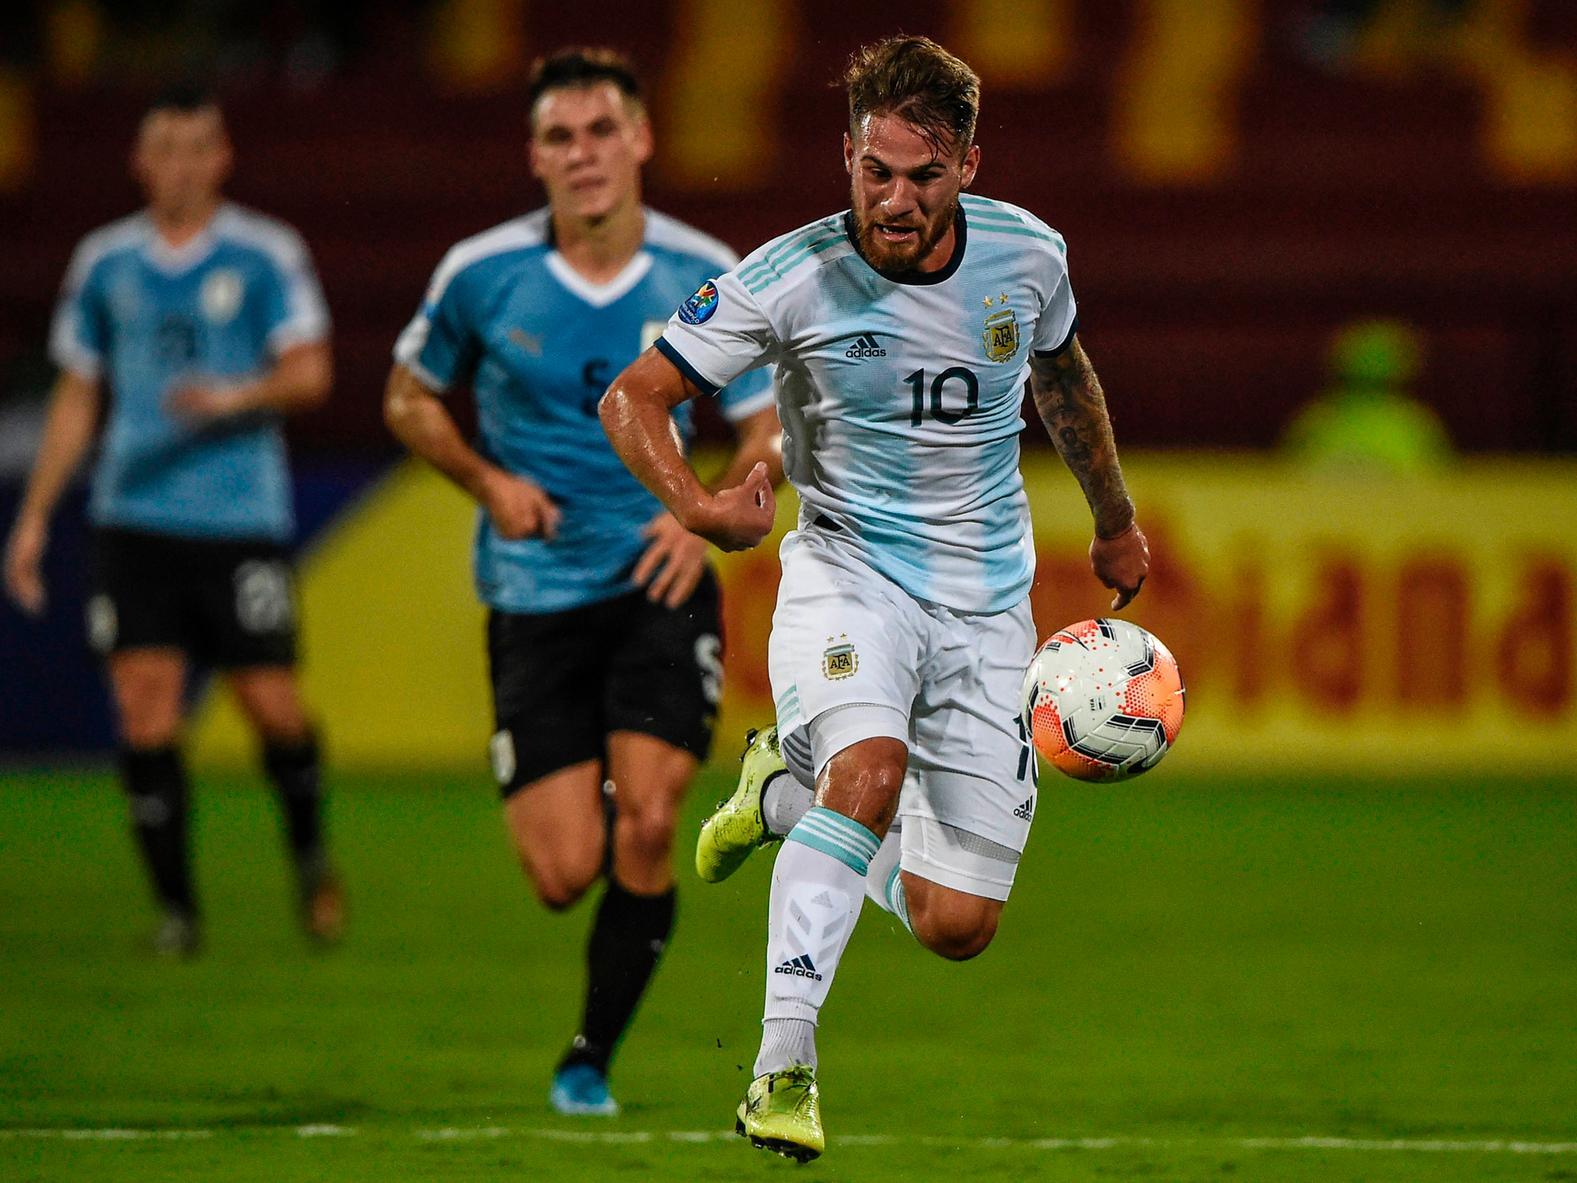 The Seagulls face Chris Wilder's side on Saturday, and Albion may have an ace up their sleeve - Alexis Mac Allister. Graham Potter has hinted that the Argentinian ace could make his debut, and he could be the ideal secret weapon.